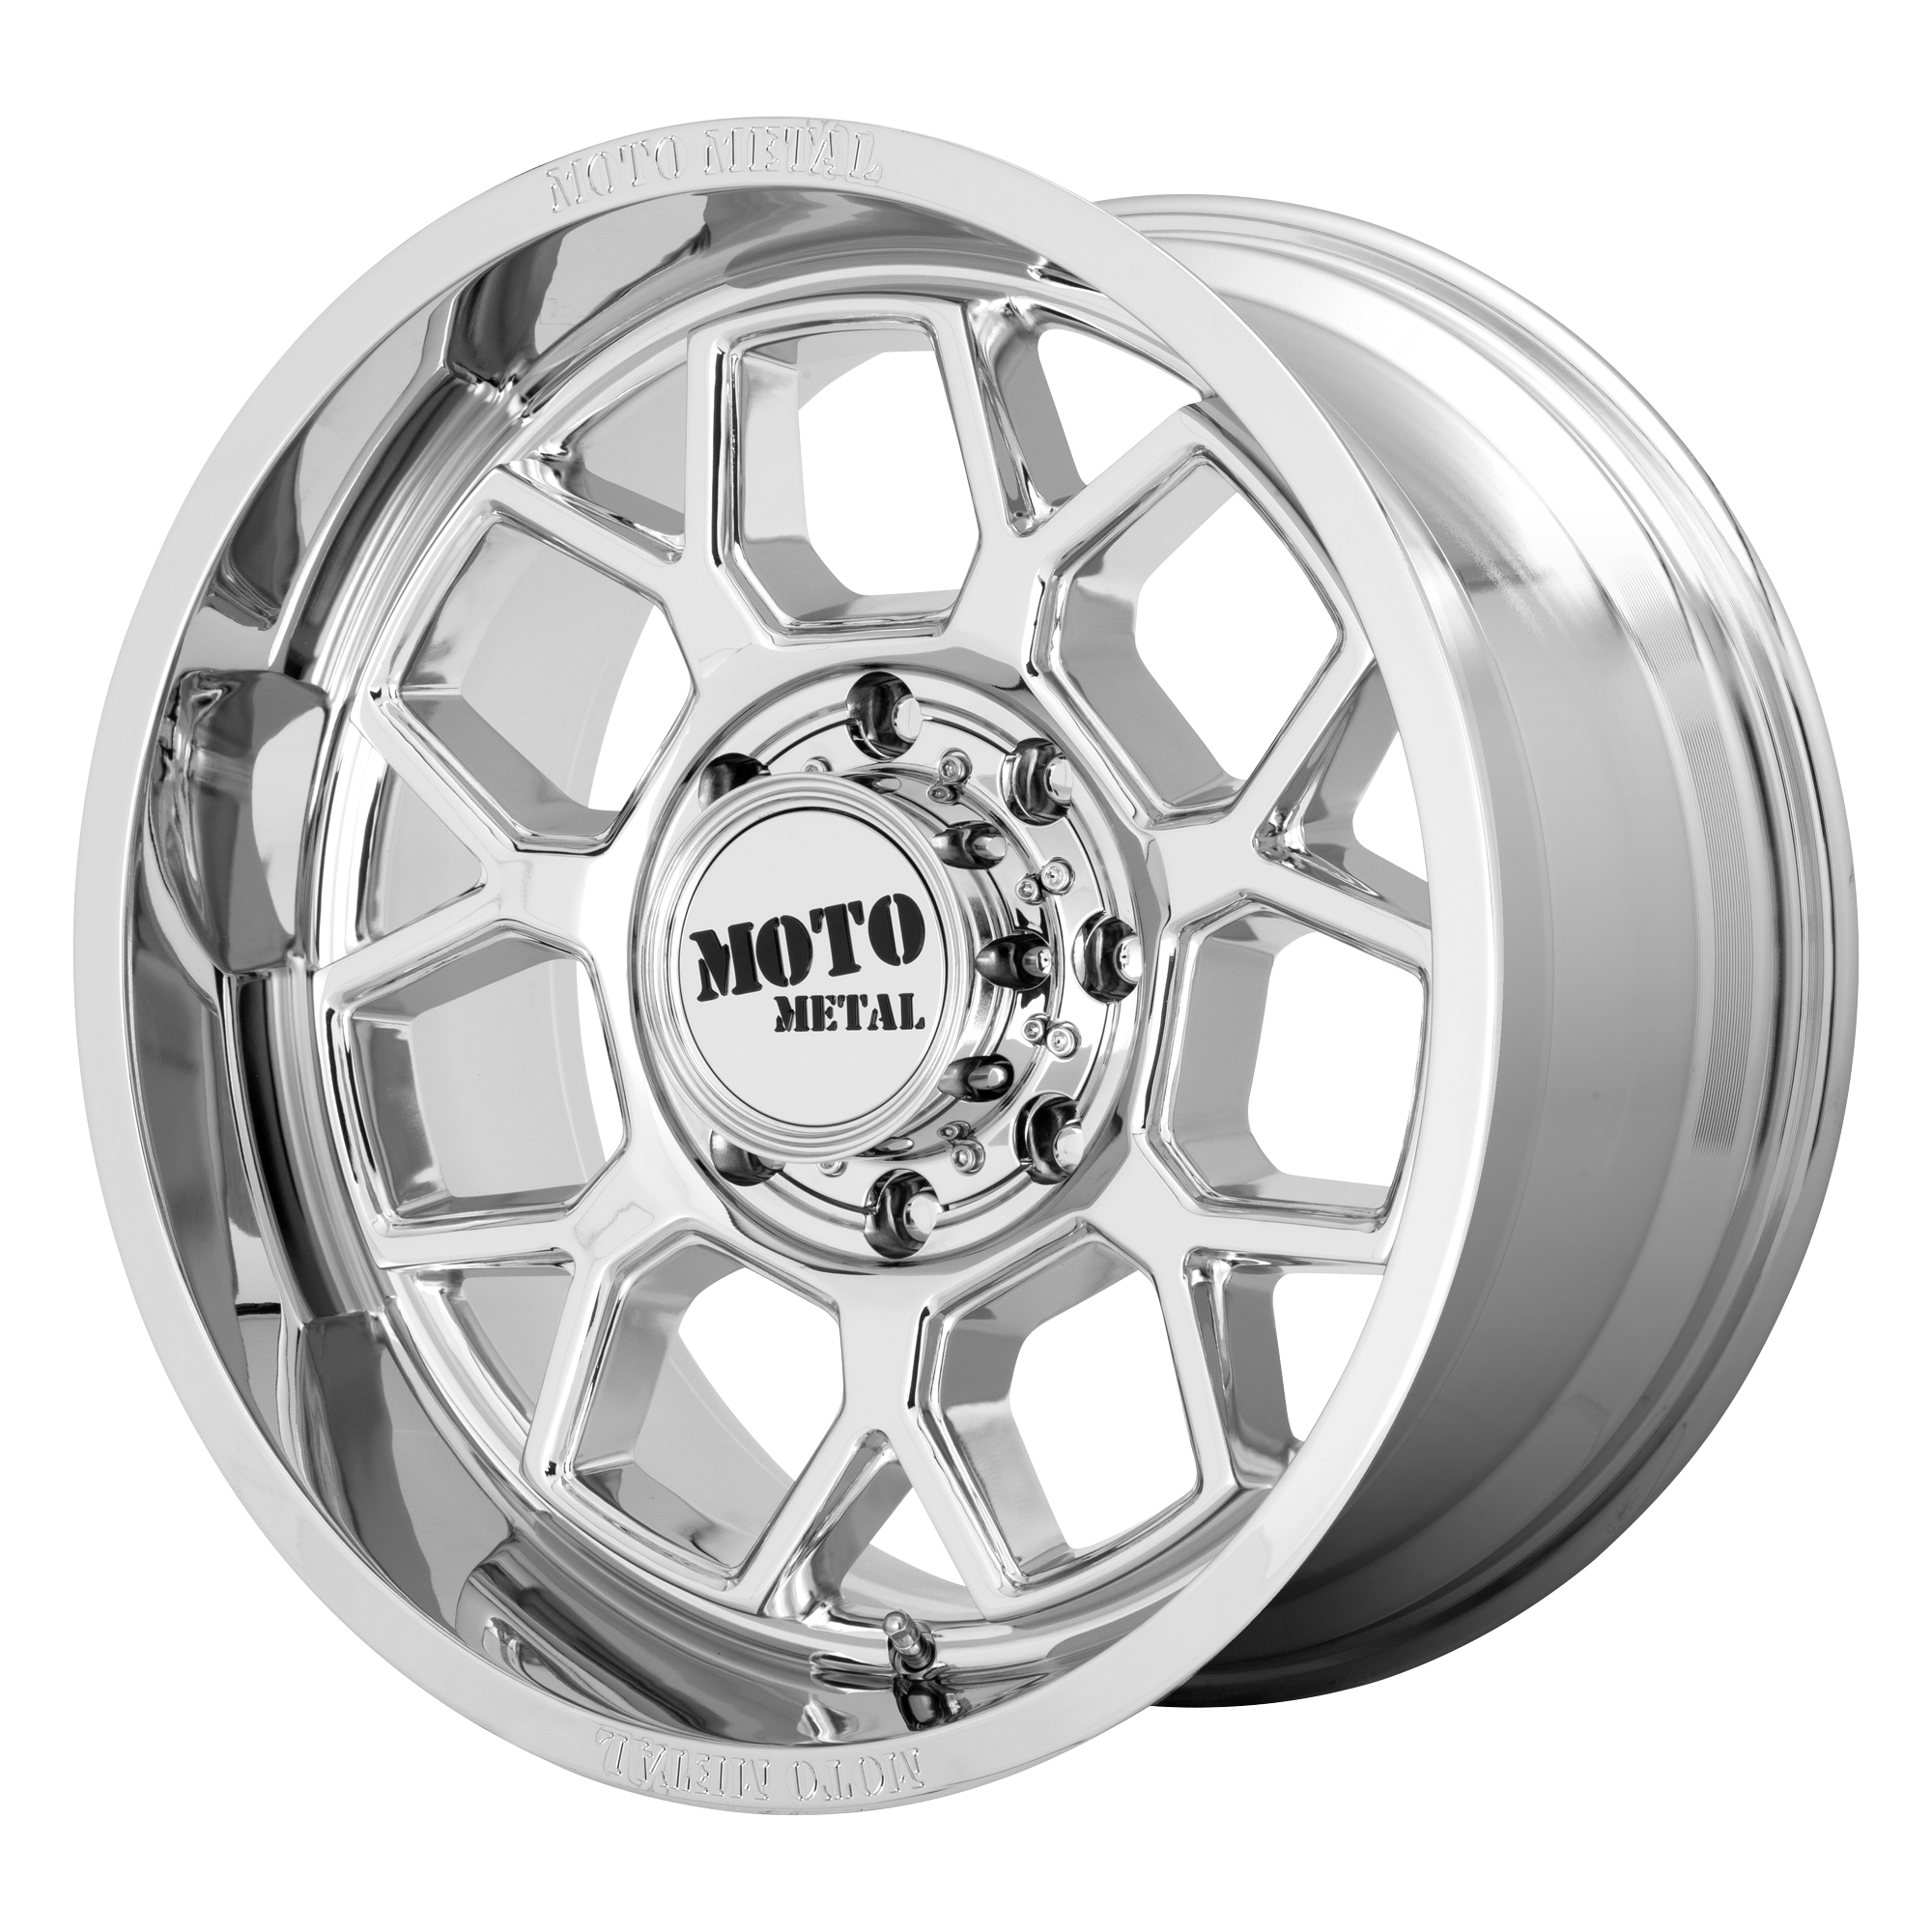 BANSHEE 20x10 5x127.00 CHROME (-18 mm) - Tires and Engine Performance